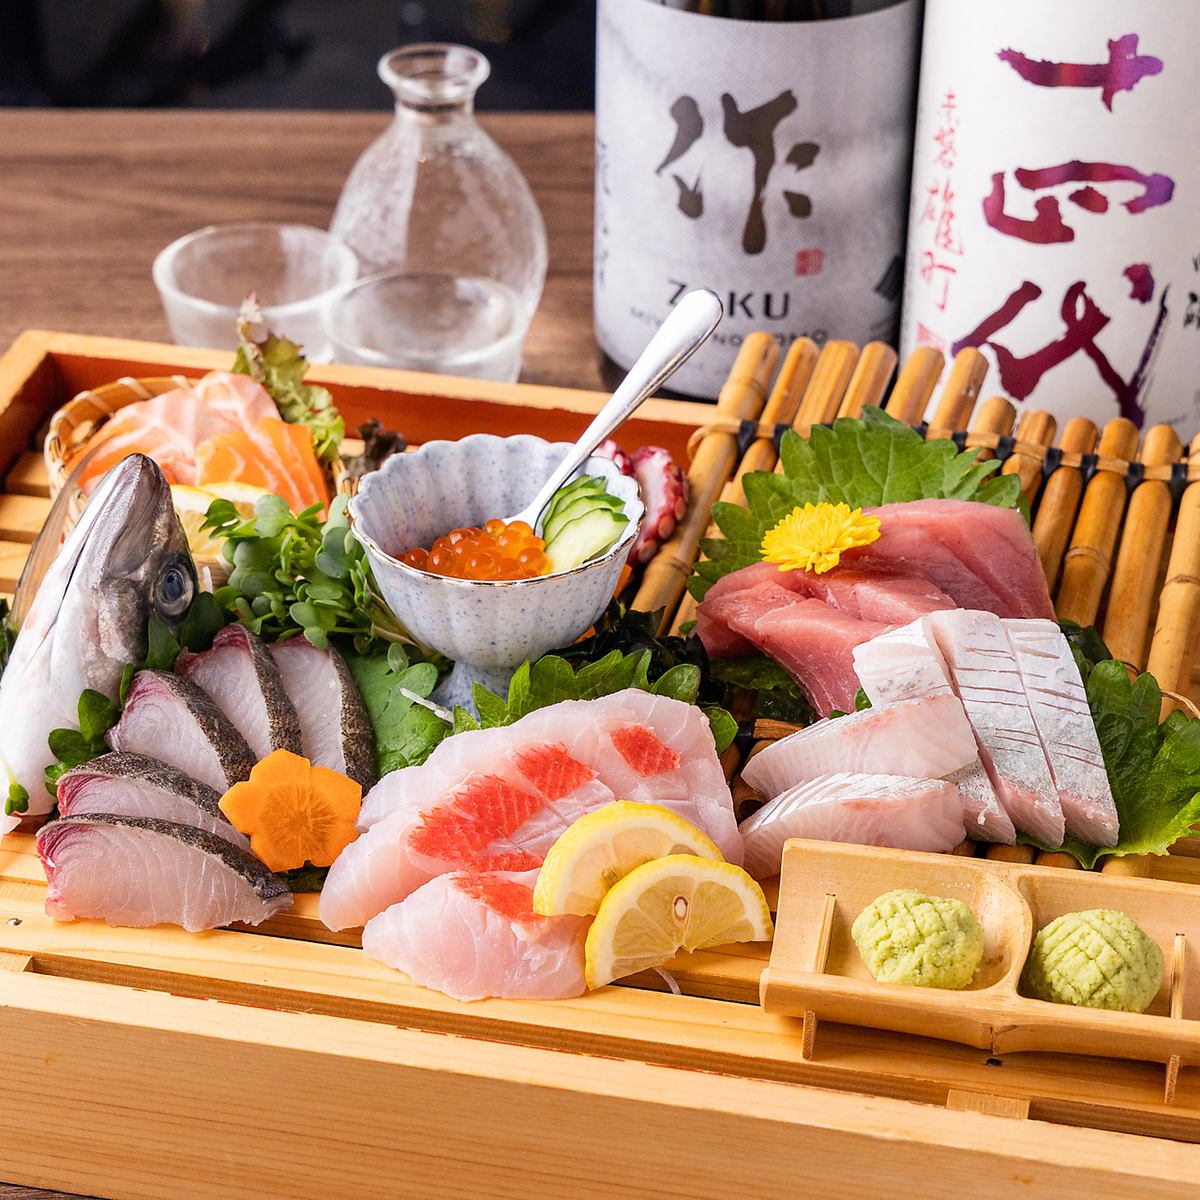 You can enjoy sake carefully selected by the chef to go with the dishes.